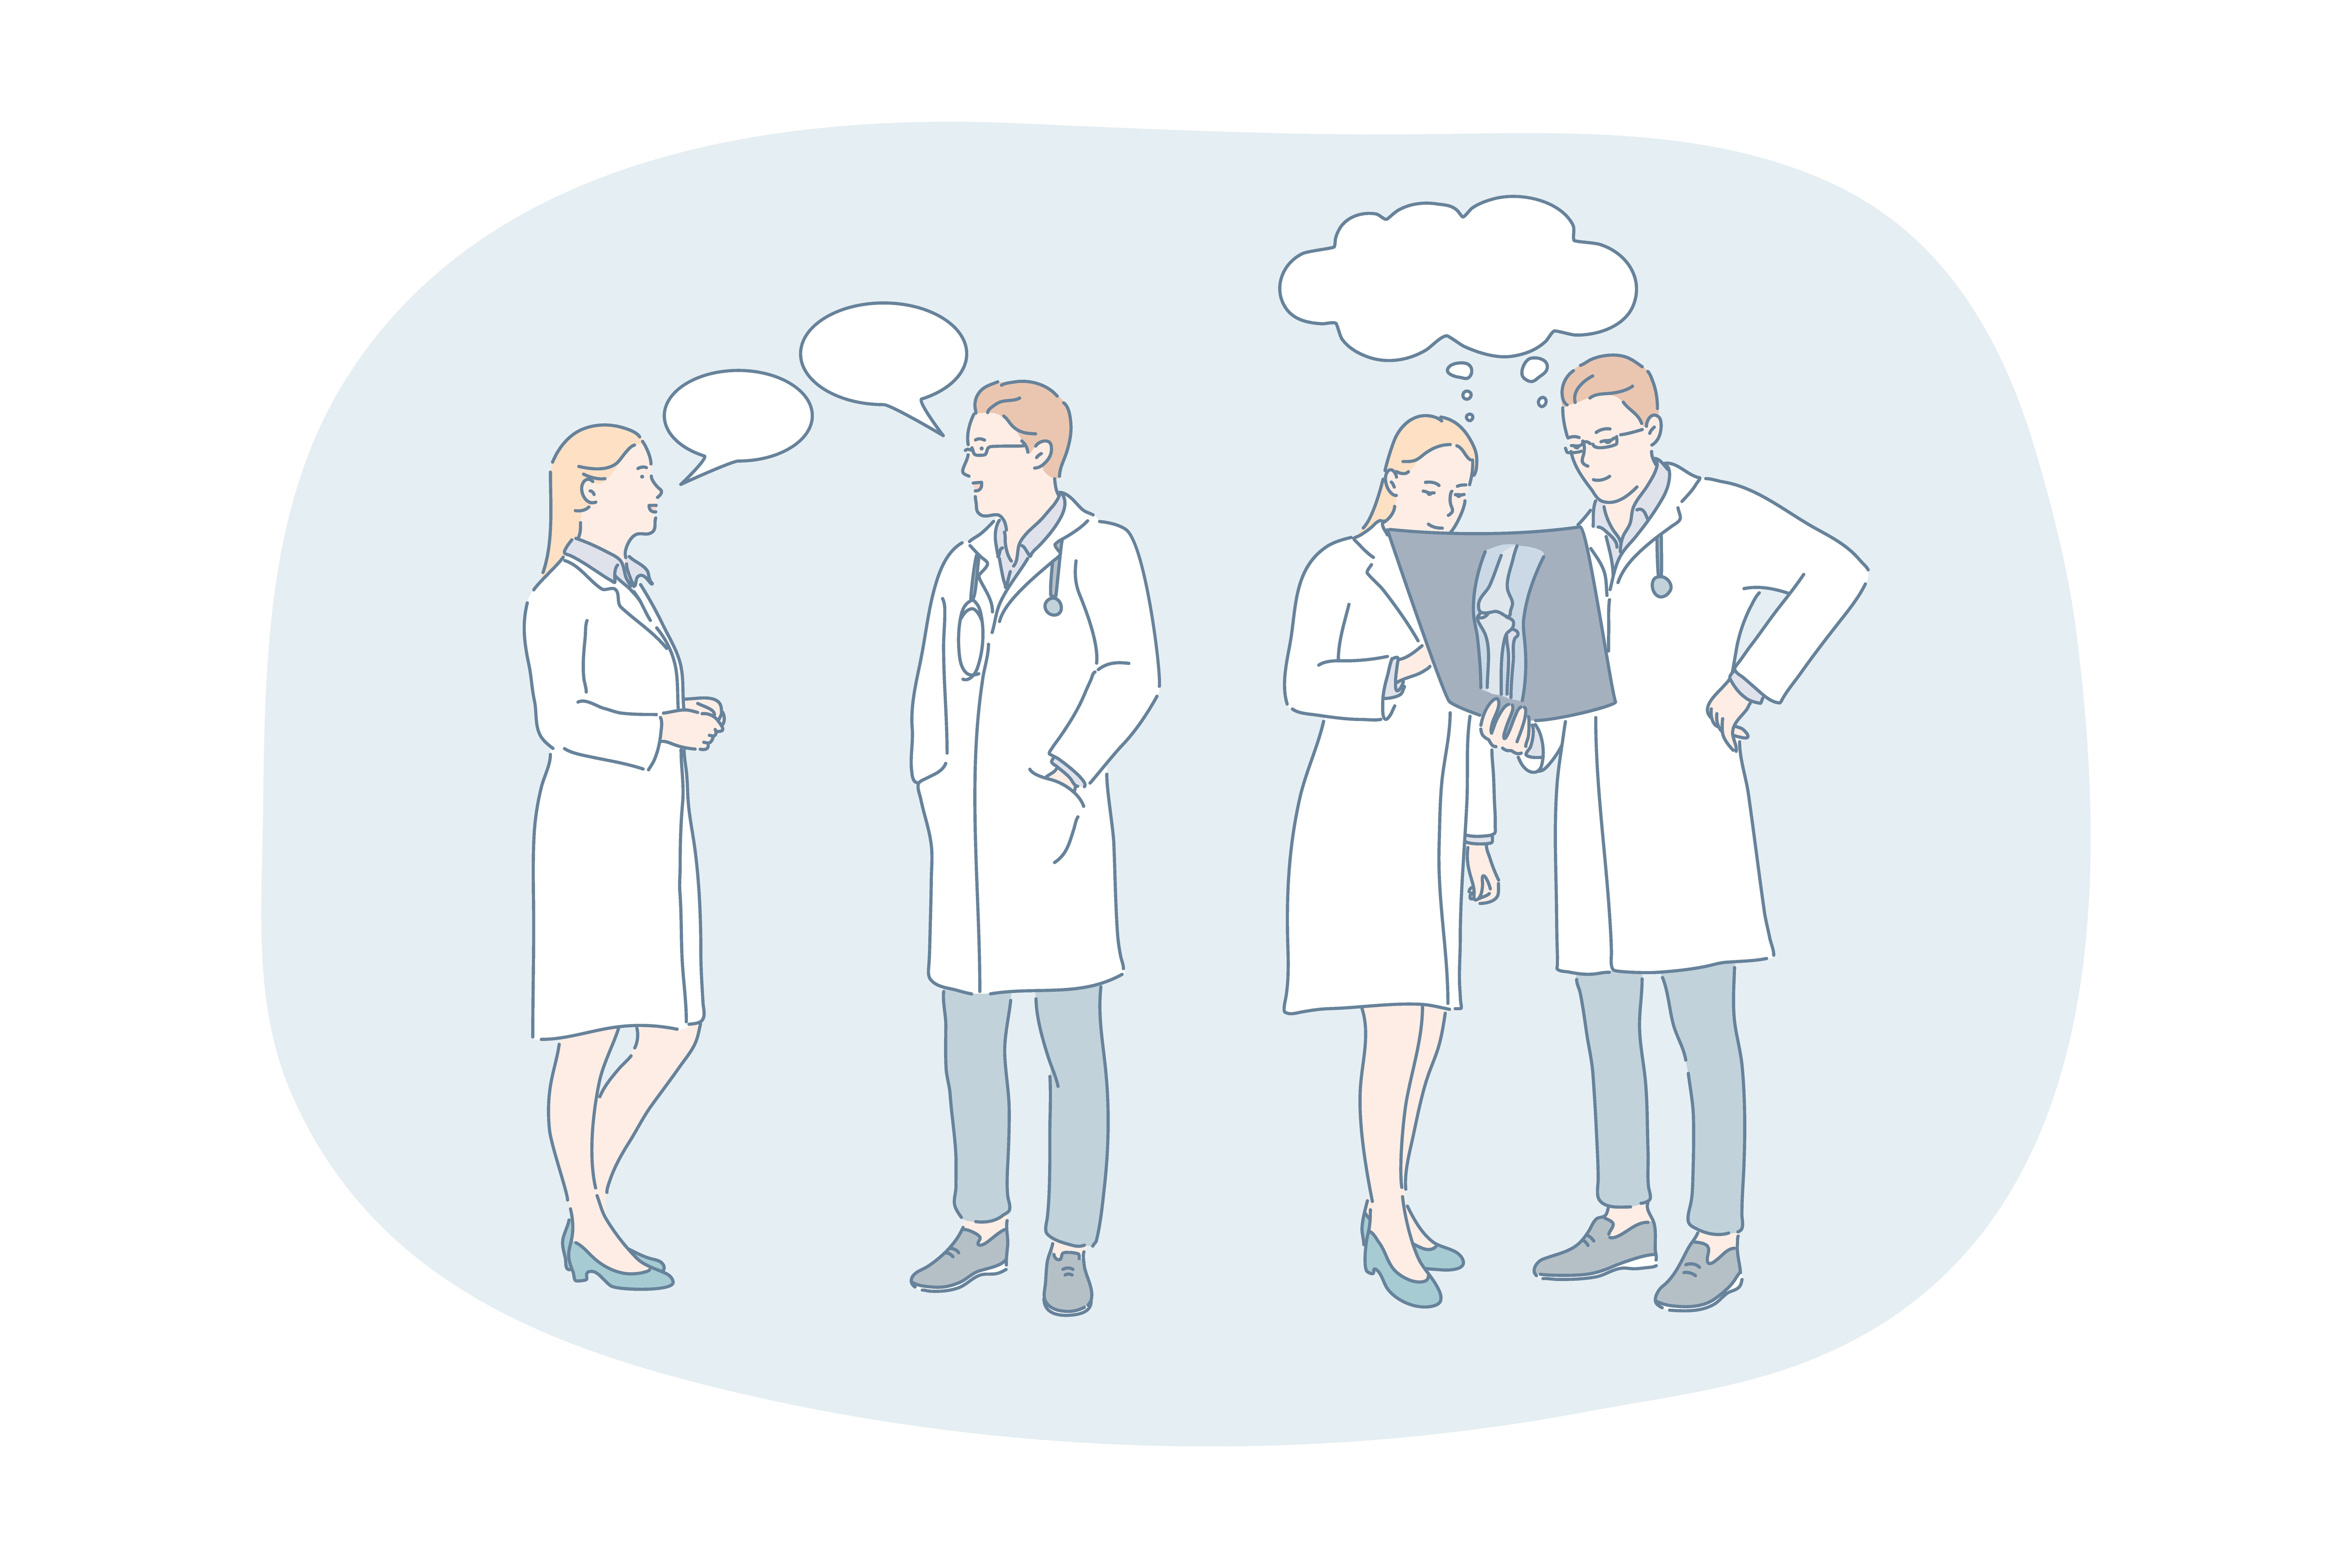 Healthcare, medicine, medicare, doctors communication and discussion concept. Young woman and man doctors in white medical uniform standing and having discussion about patients injury together. Healthcare, medicine, medicare, doctors communication and discussion concept